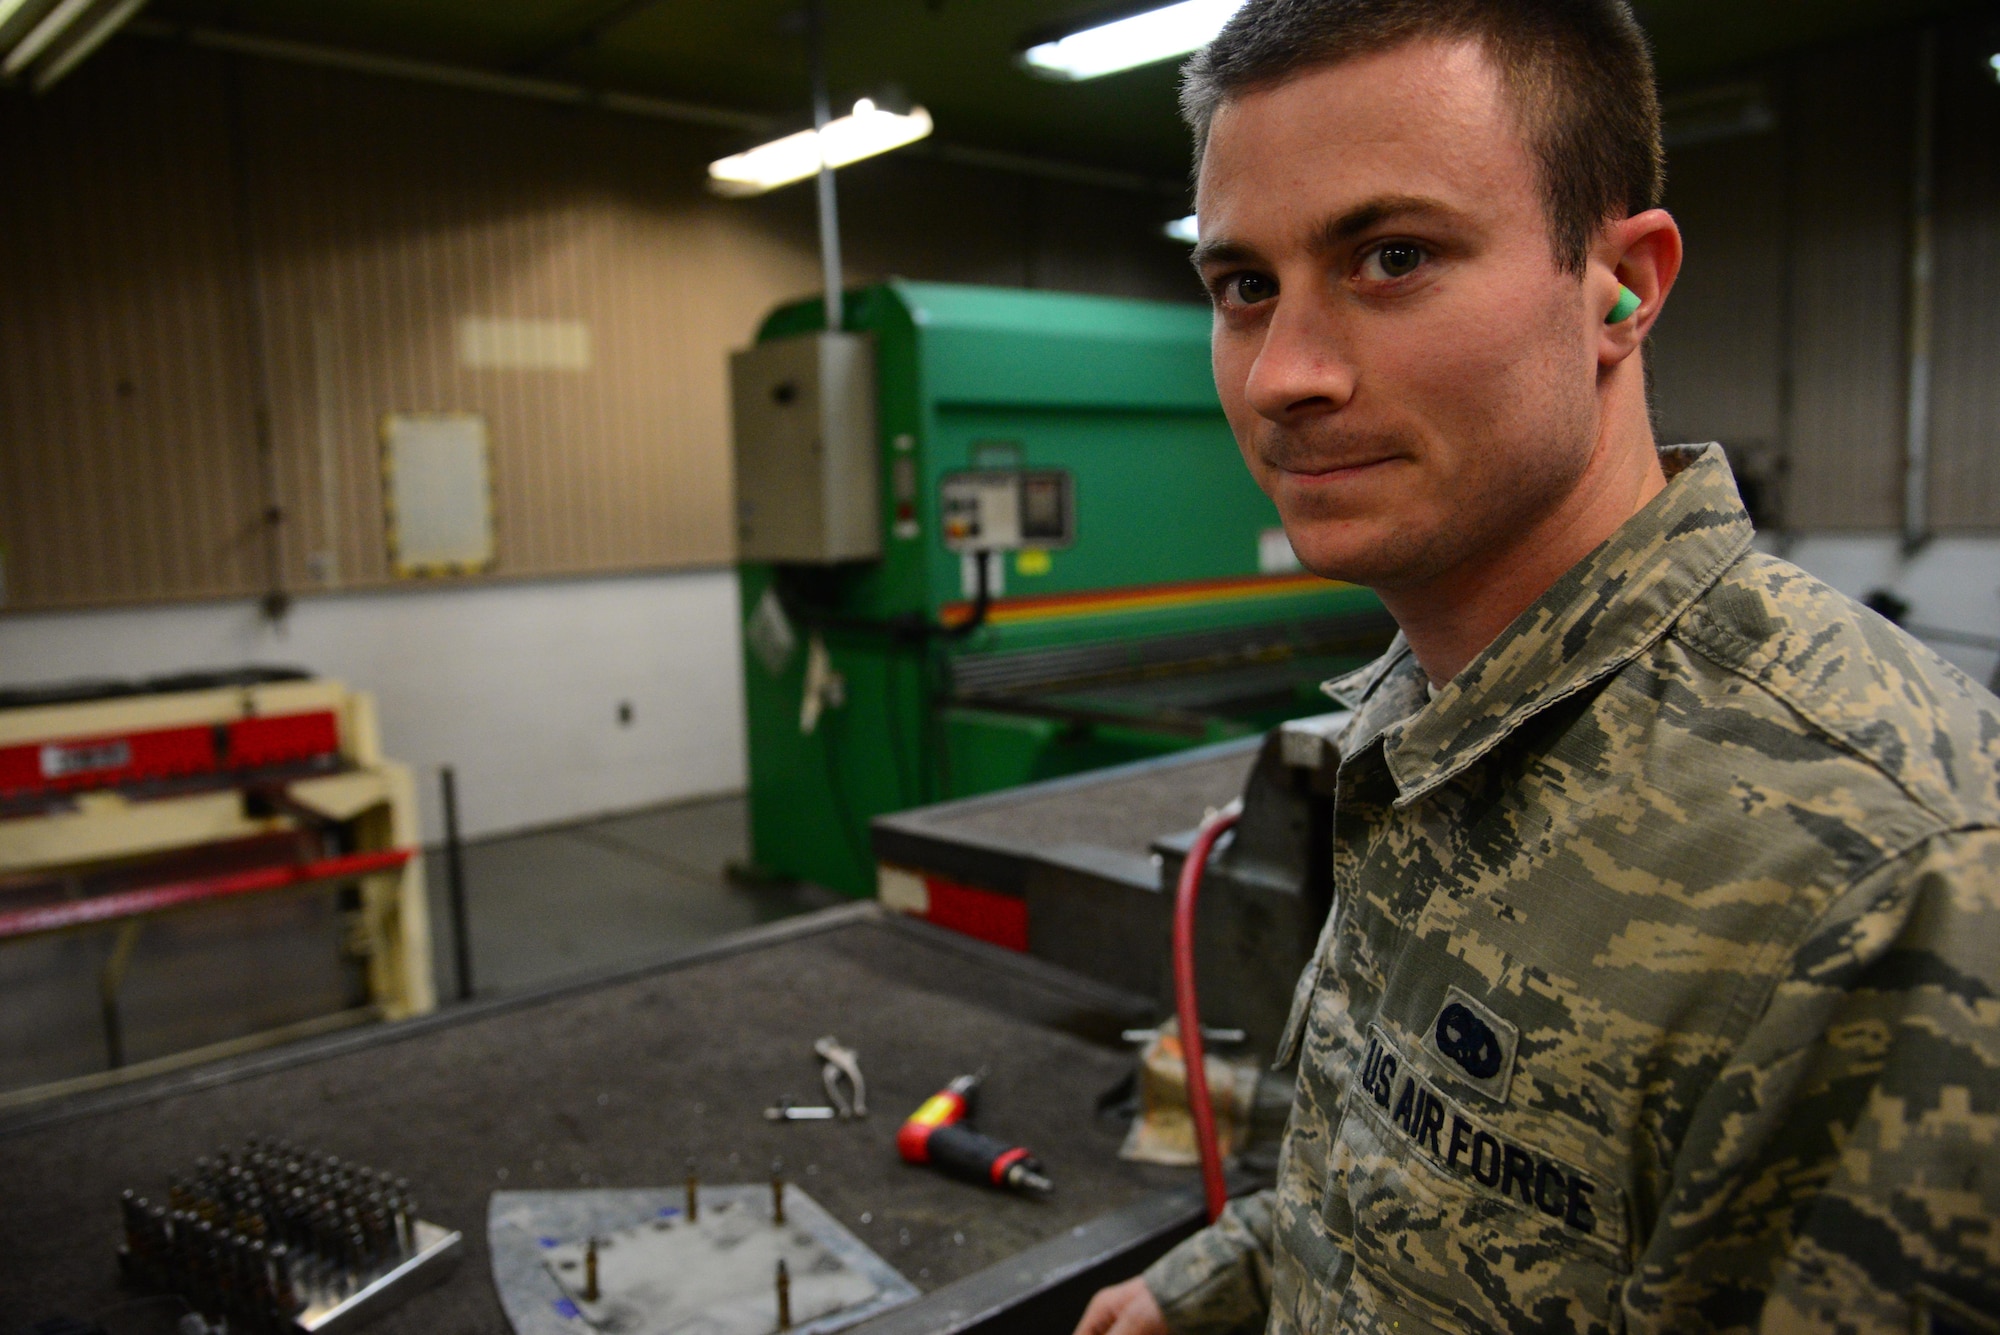 Senior Airman Jon Weiglein, 51st Maintenance Squadron aircraft structural journeyman, prepares to demonstrate drilling techniques at Osan Air Base, Republic of Korea, Jan. 12, 2016. Aircraft structural maintenance specialists are tasked with preserving the structural integrity of operational aircraft on base. (U.S. Air Force photo by Staff Sgt. Amber Grimm/Released)